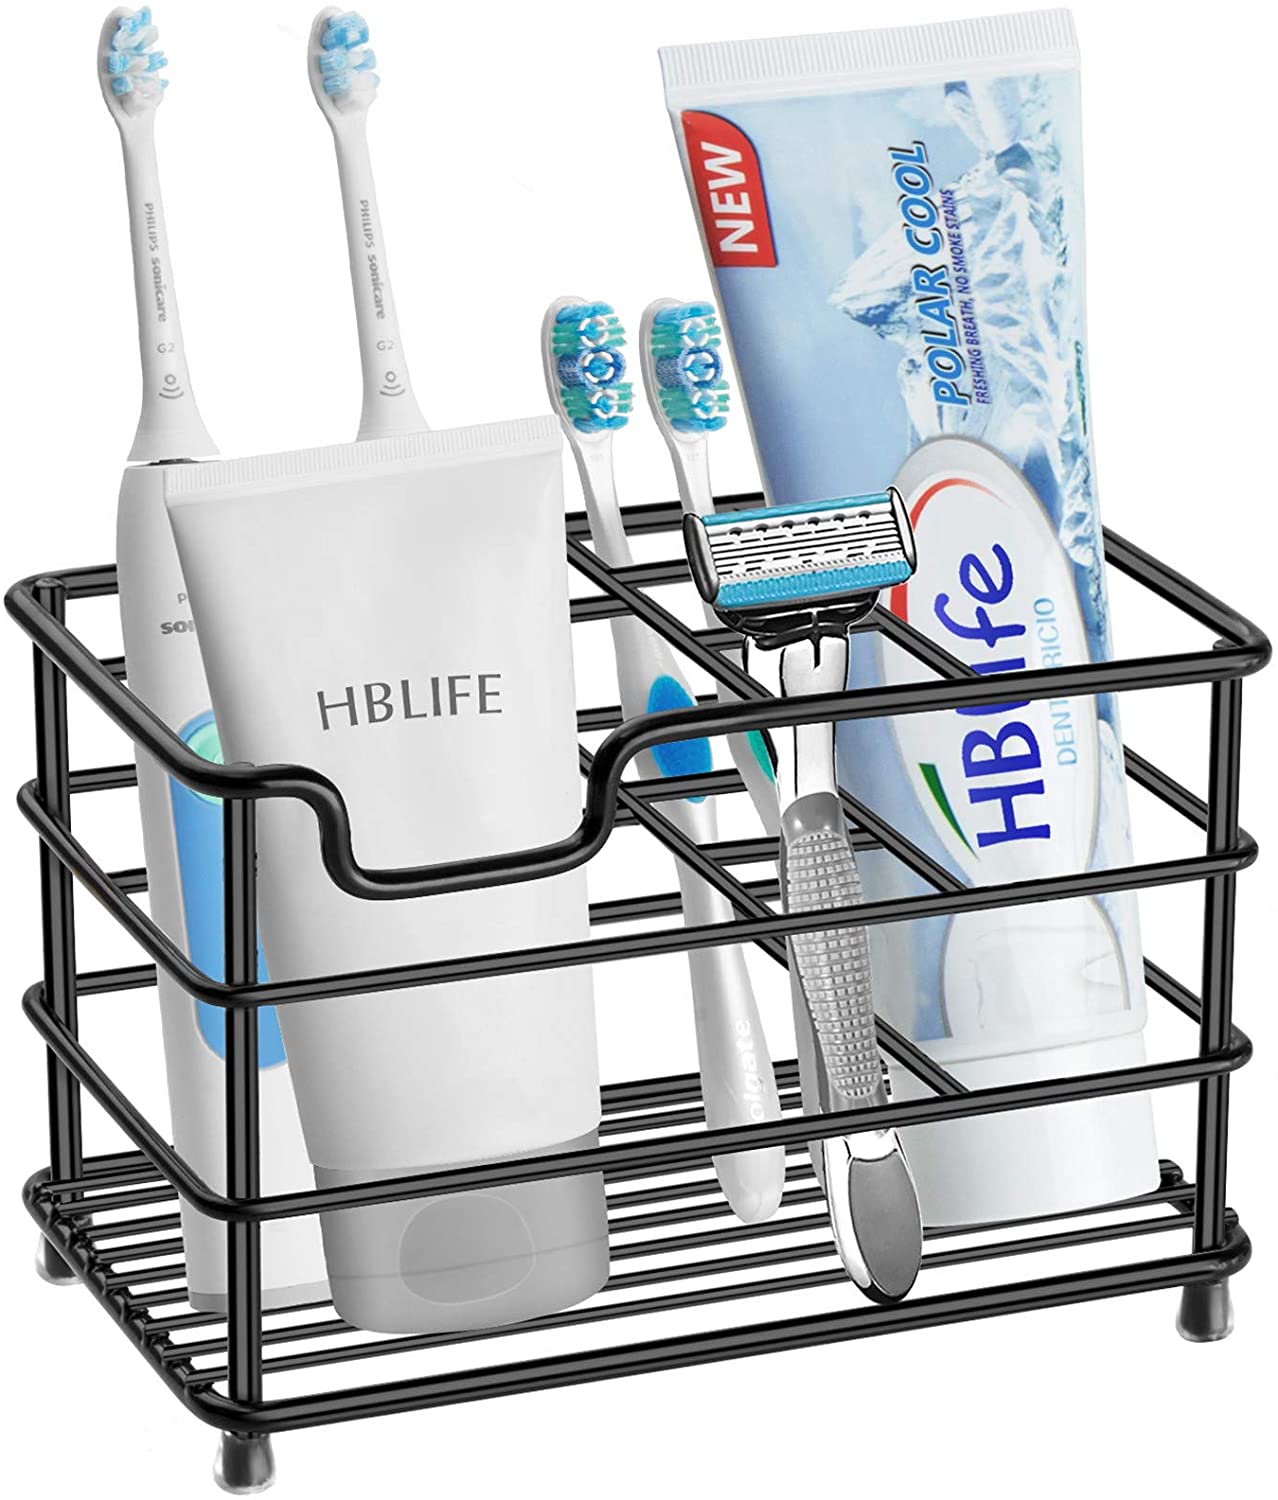 hblife Electric Toothbrush Holder, Large Stainless Steel Toothpaste Holder Bathroom Accessories Organizer